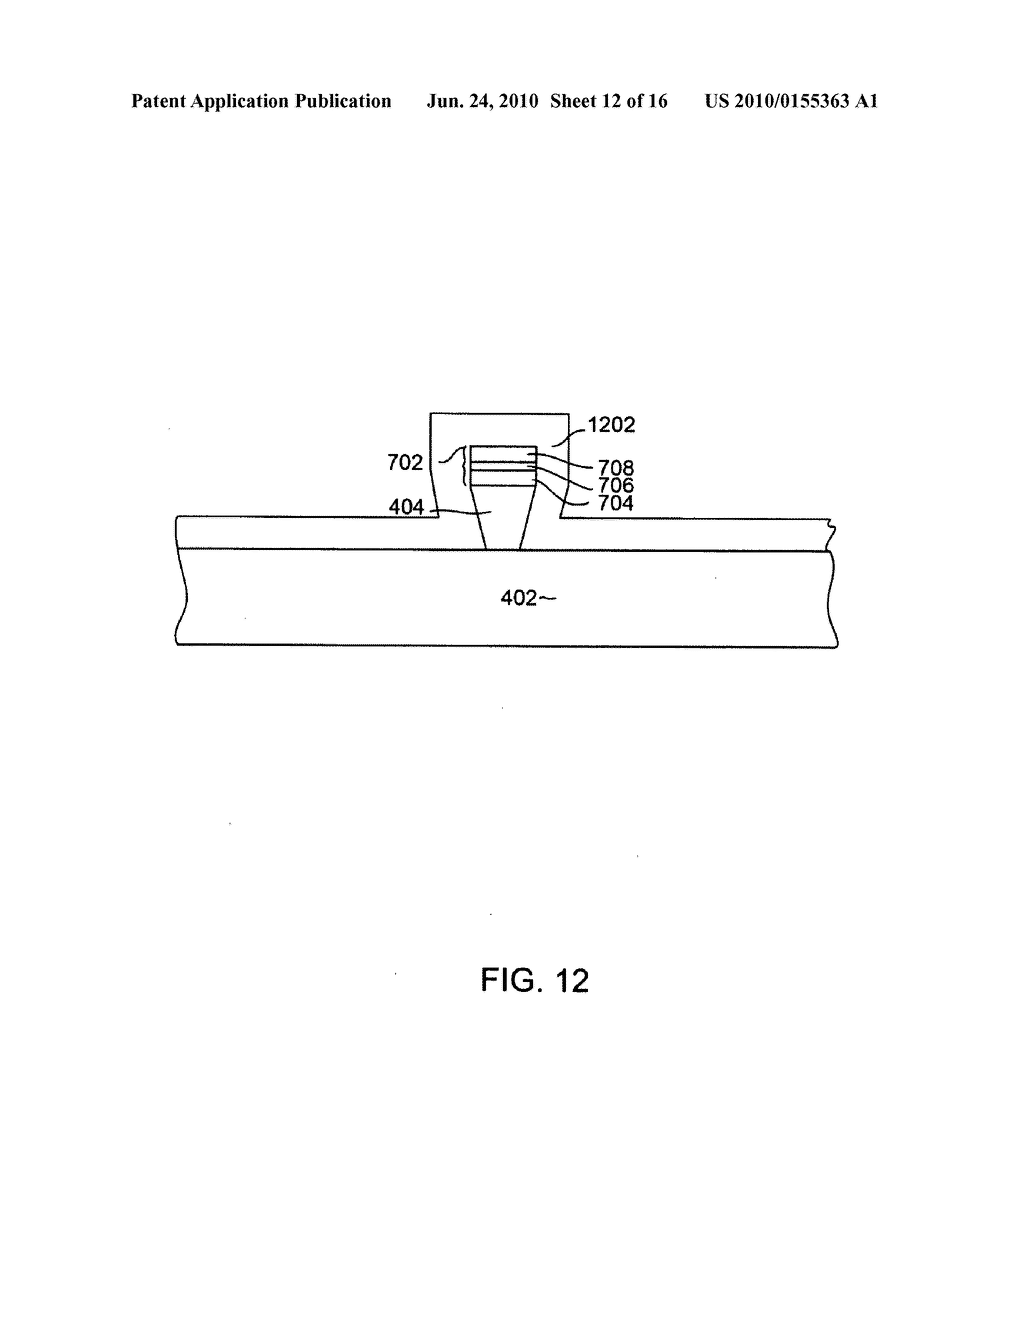 METHOD FOR MANUFACTURING A MAGNETIC WRITE HEAD HAVING A WRITE POLE WITH A TRAILING EDGE TAPER USING A RIEABLE HARD MASK - diagram, schematic, and image 13